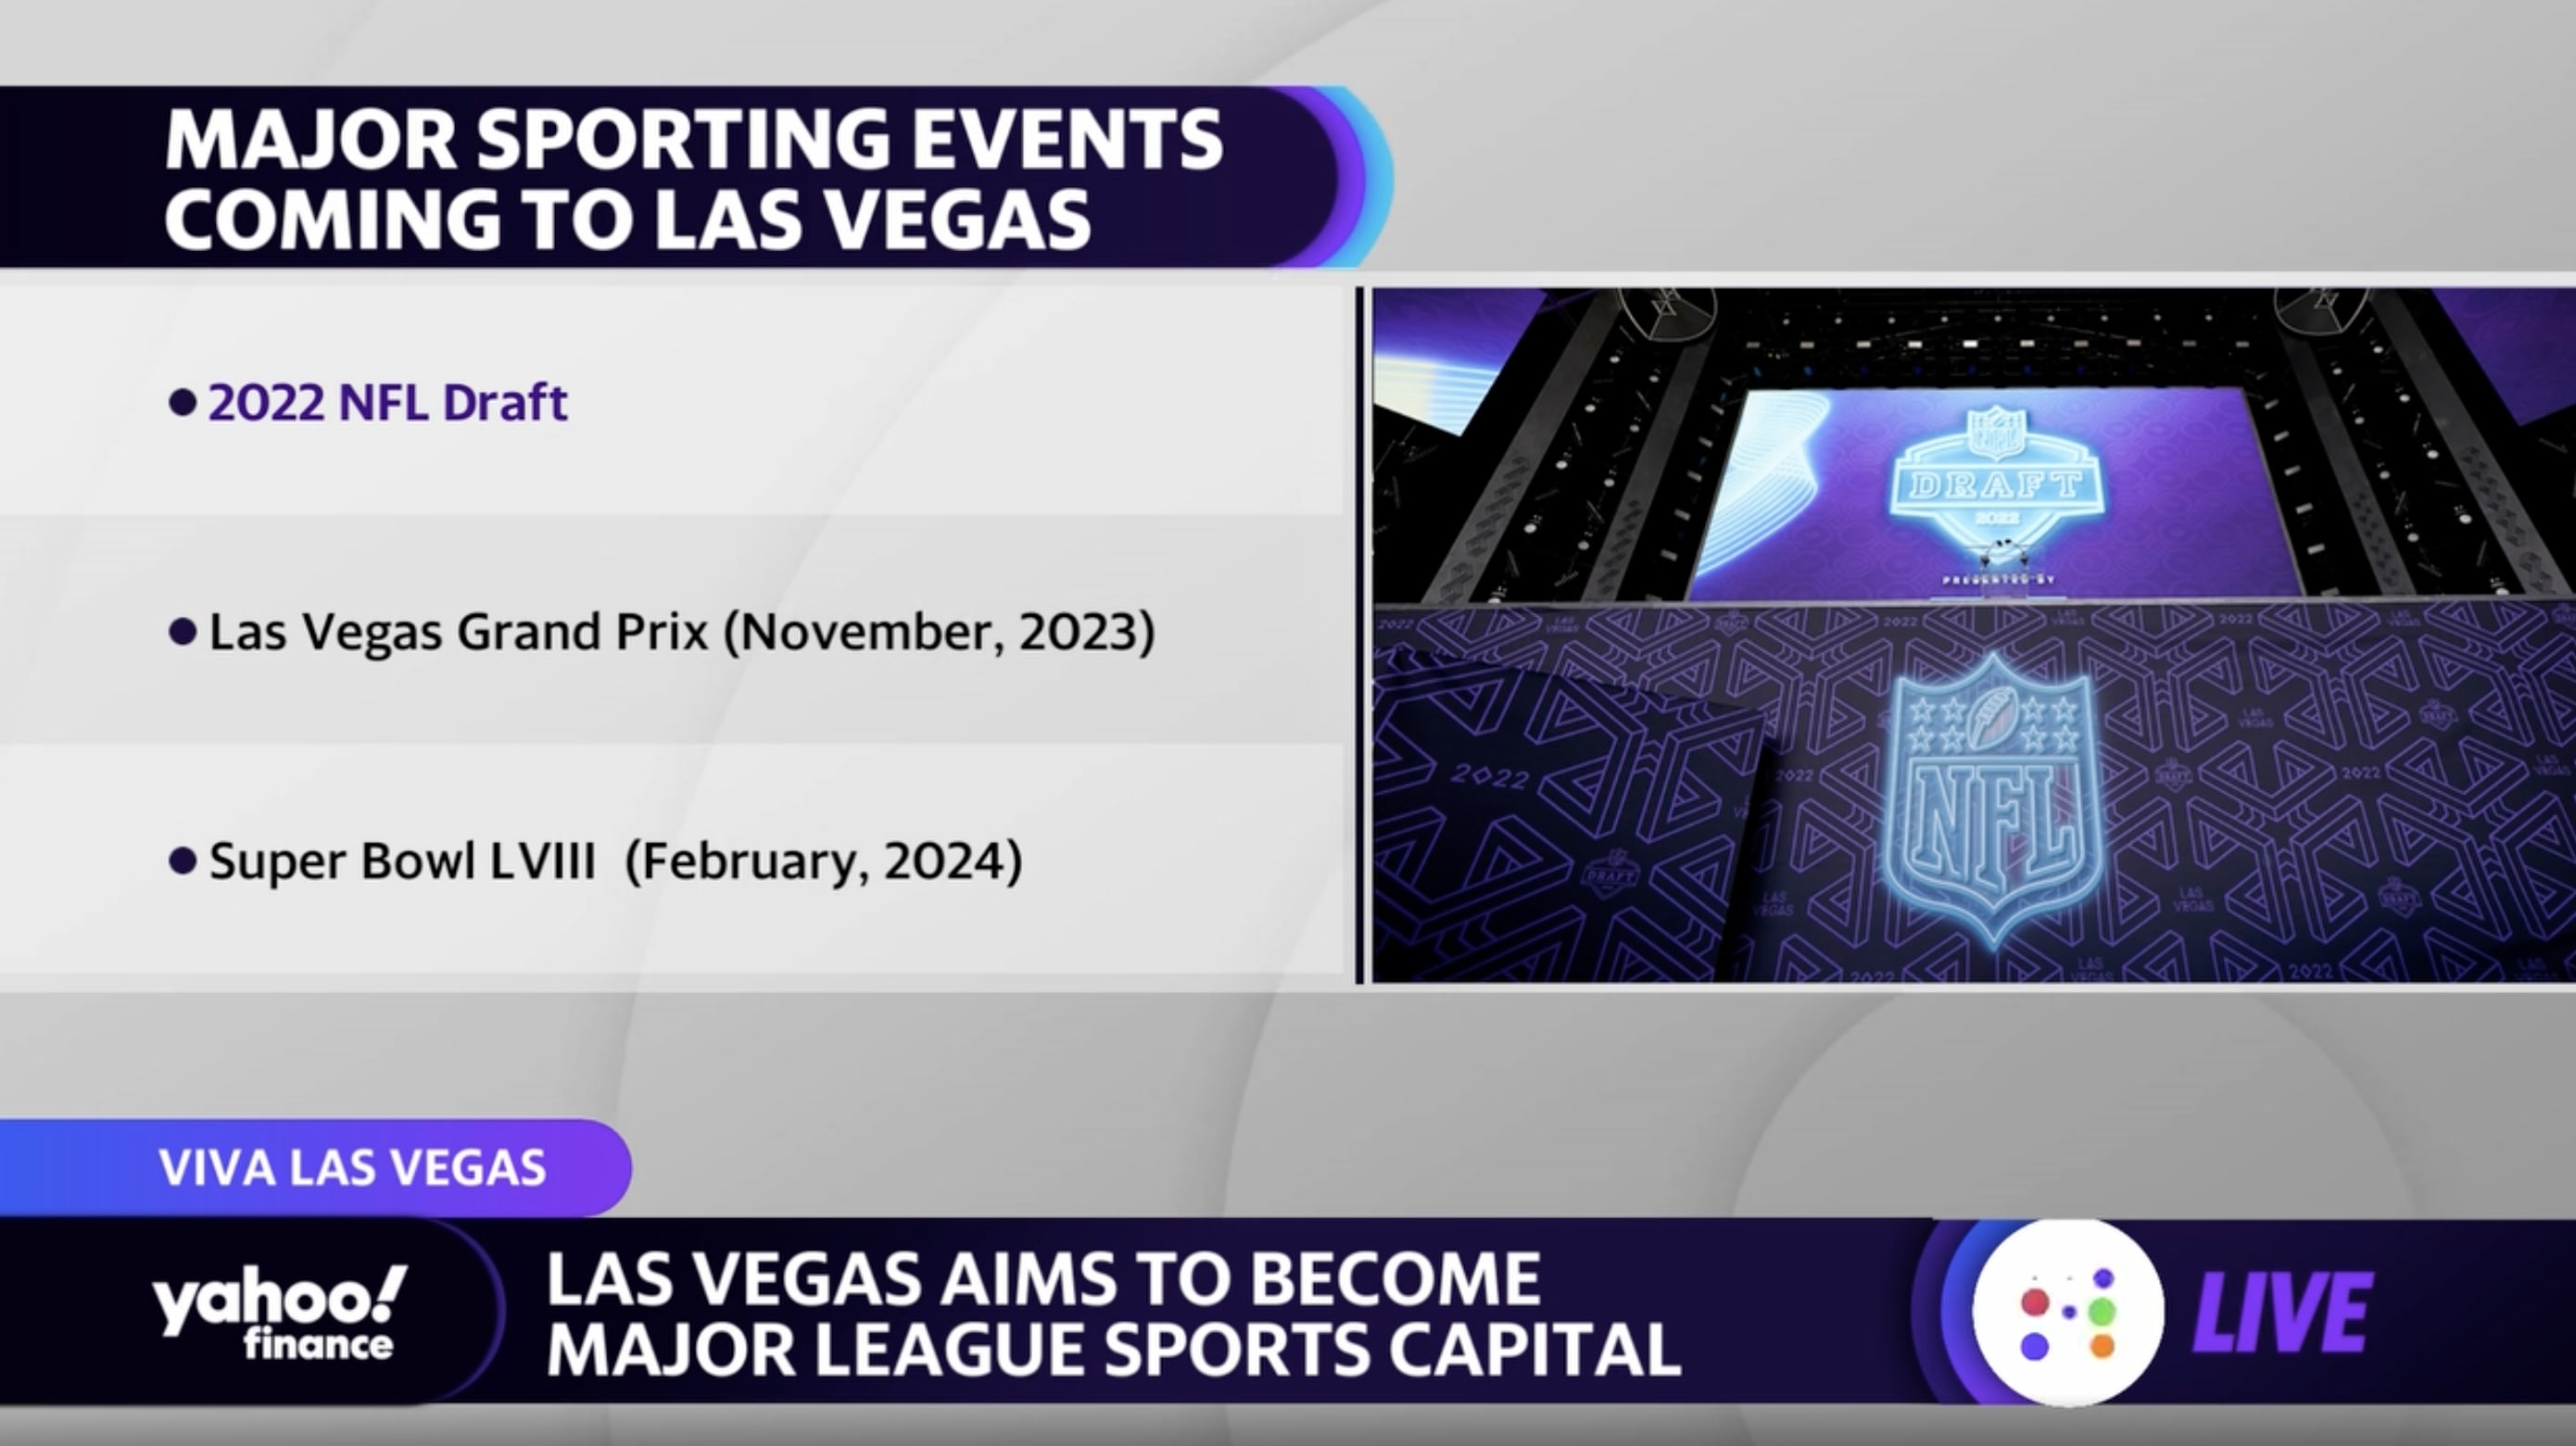 Las Vegas aims to become a major league sports capital with 2022 NFL Draft, betting